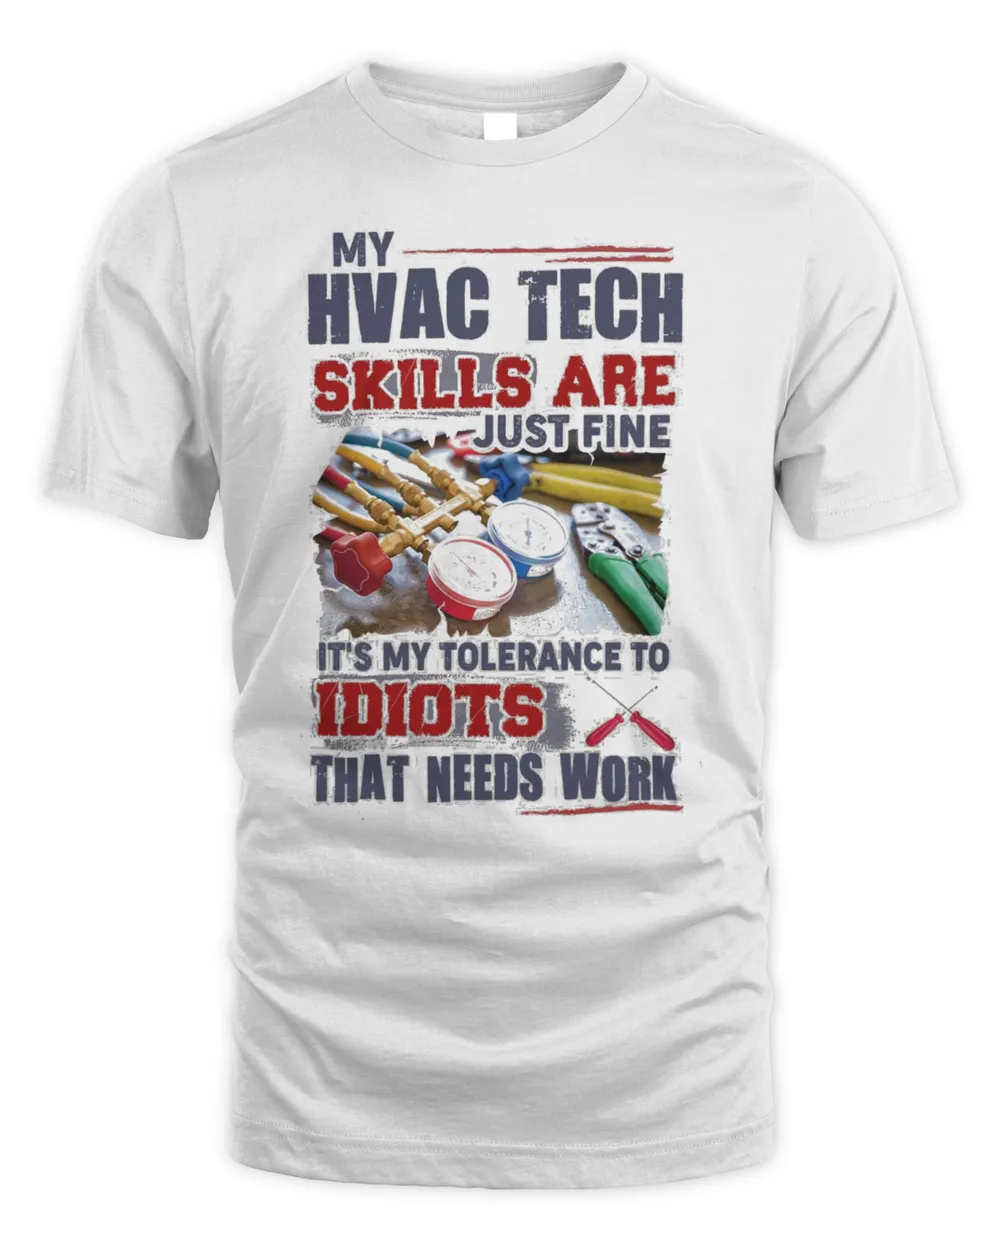 My Hvac Tech Skills Are Just Fine It's My Tolerance To Idiots That Needs Work Shirt